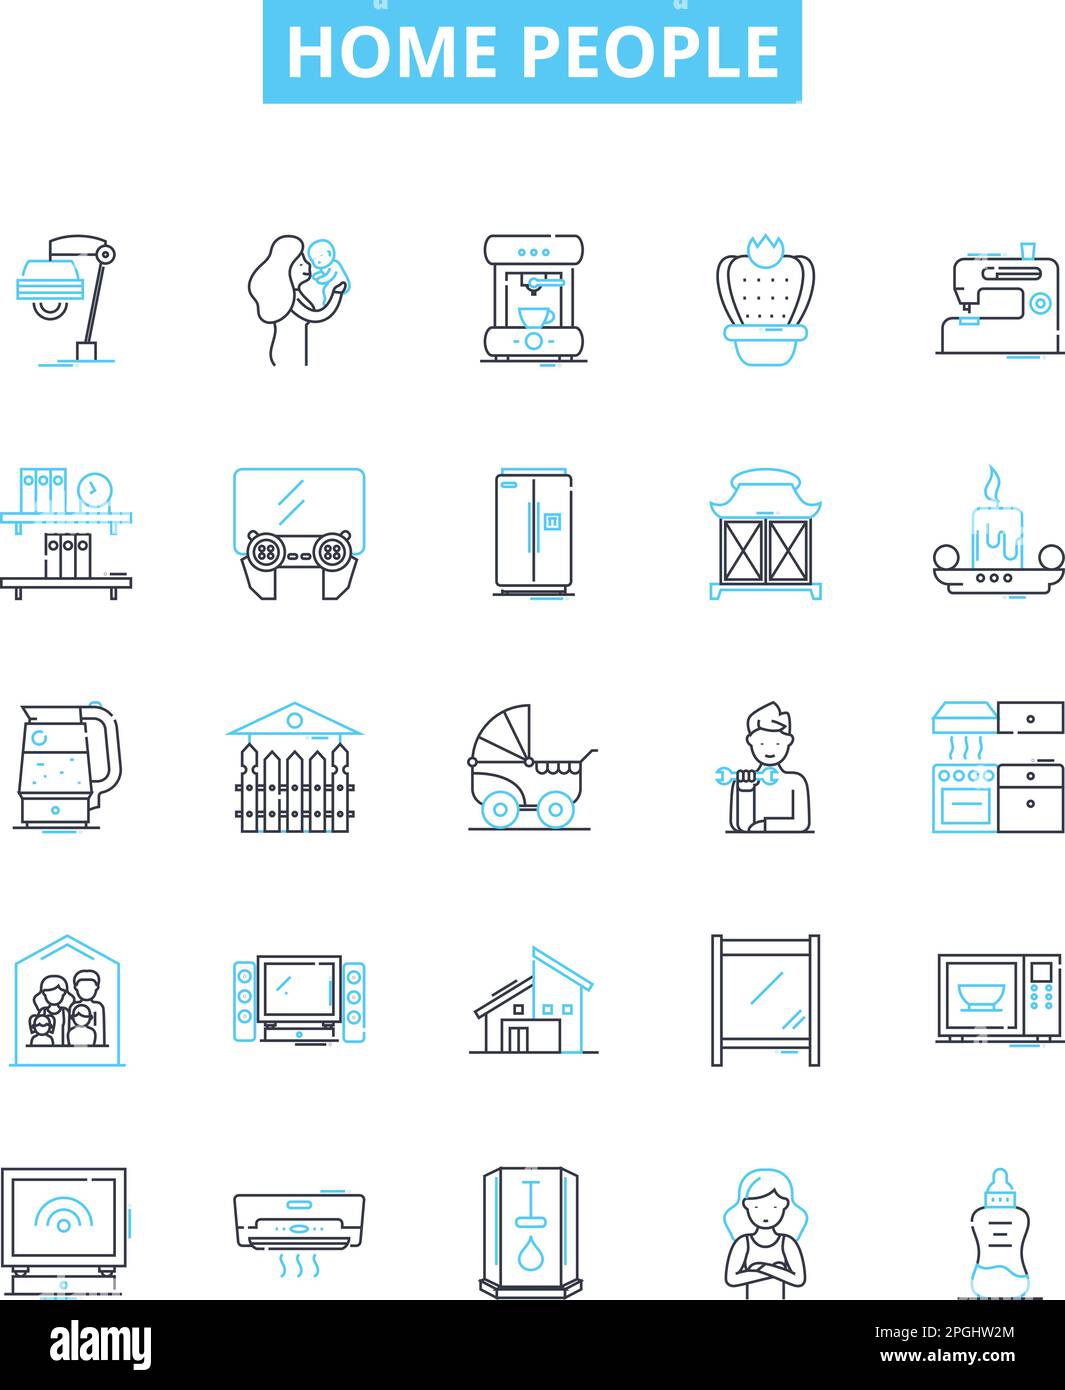 Home people vector line icons set. Homeowners, Dwellers, Residents, Housers, Occupiers, Inhabitants, Occupants illustration outline concept symbols Stock Vector